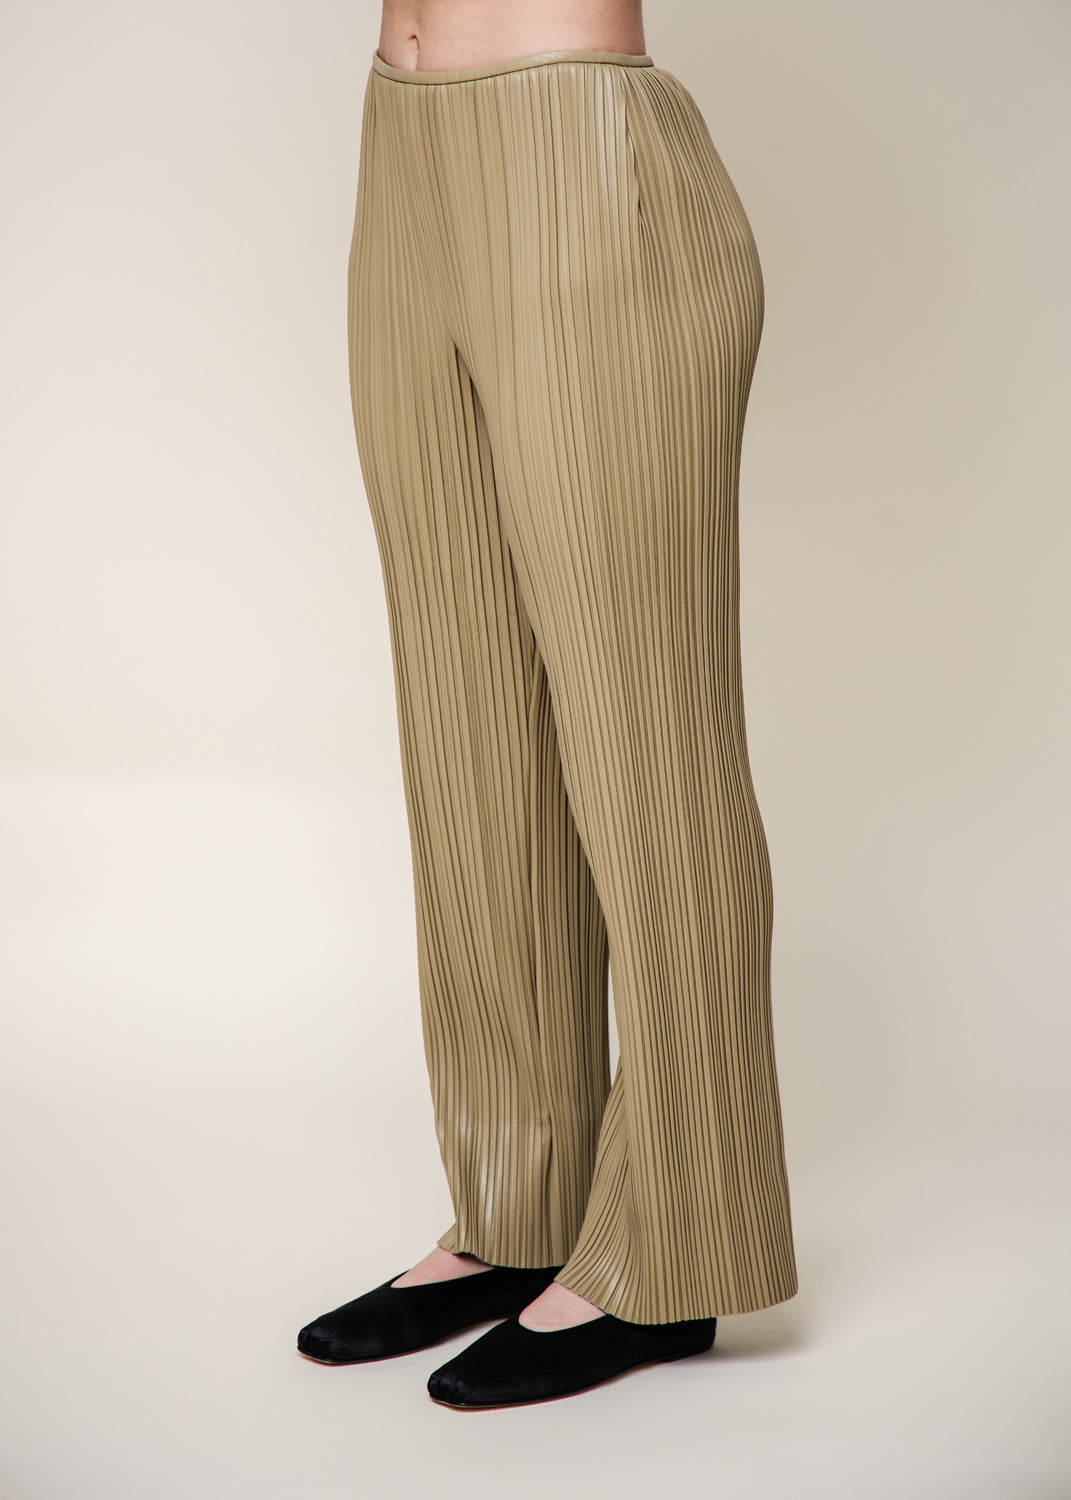 Emae Cropped Pleat Pants